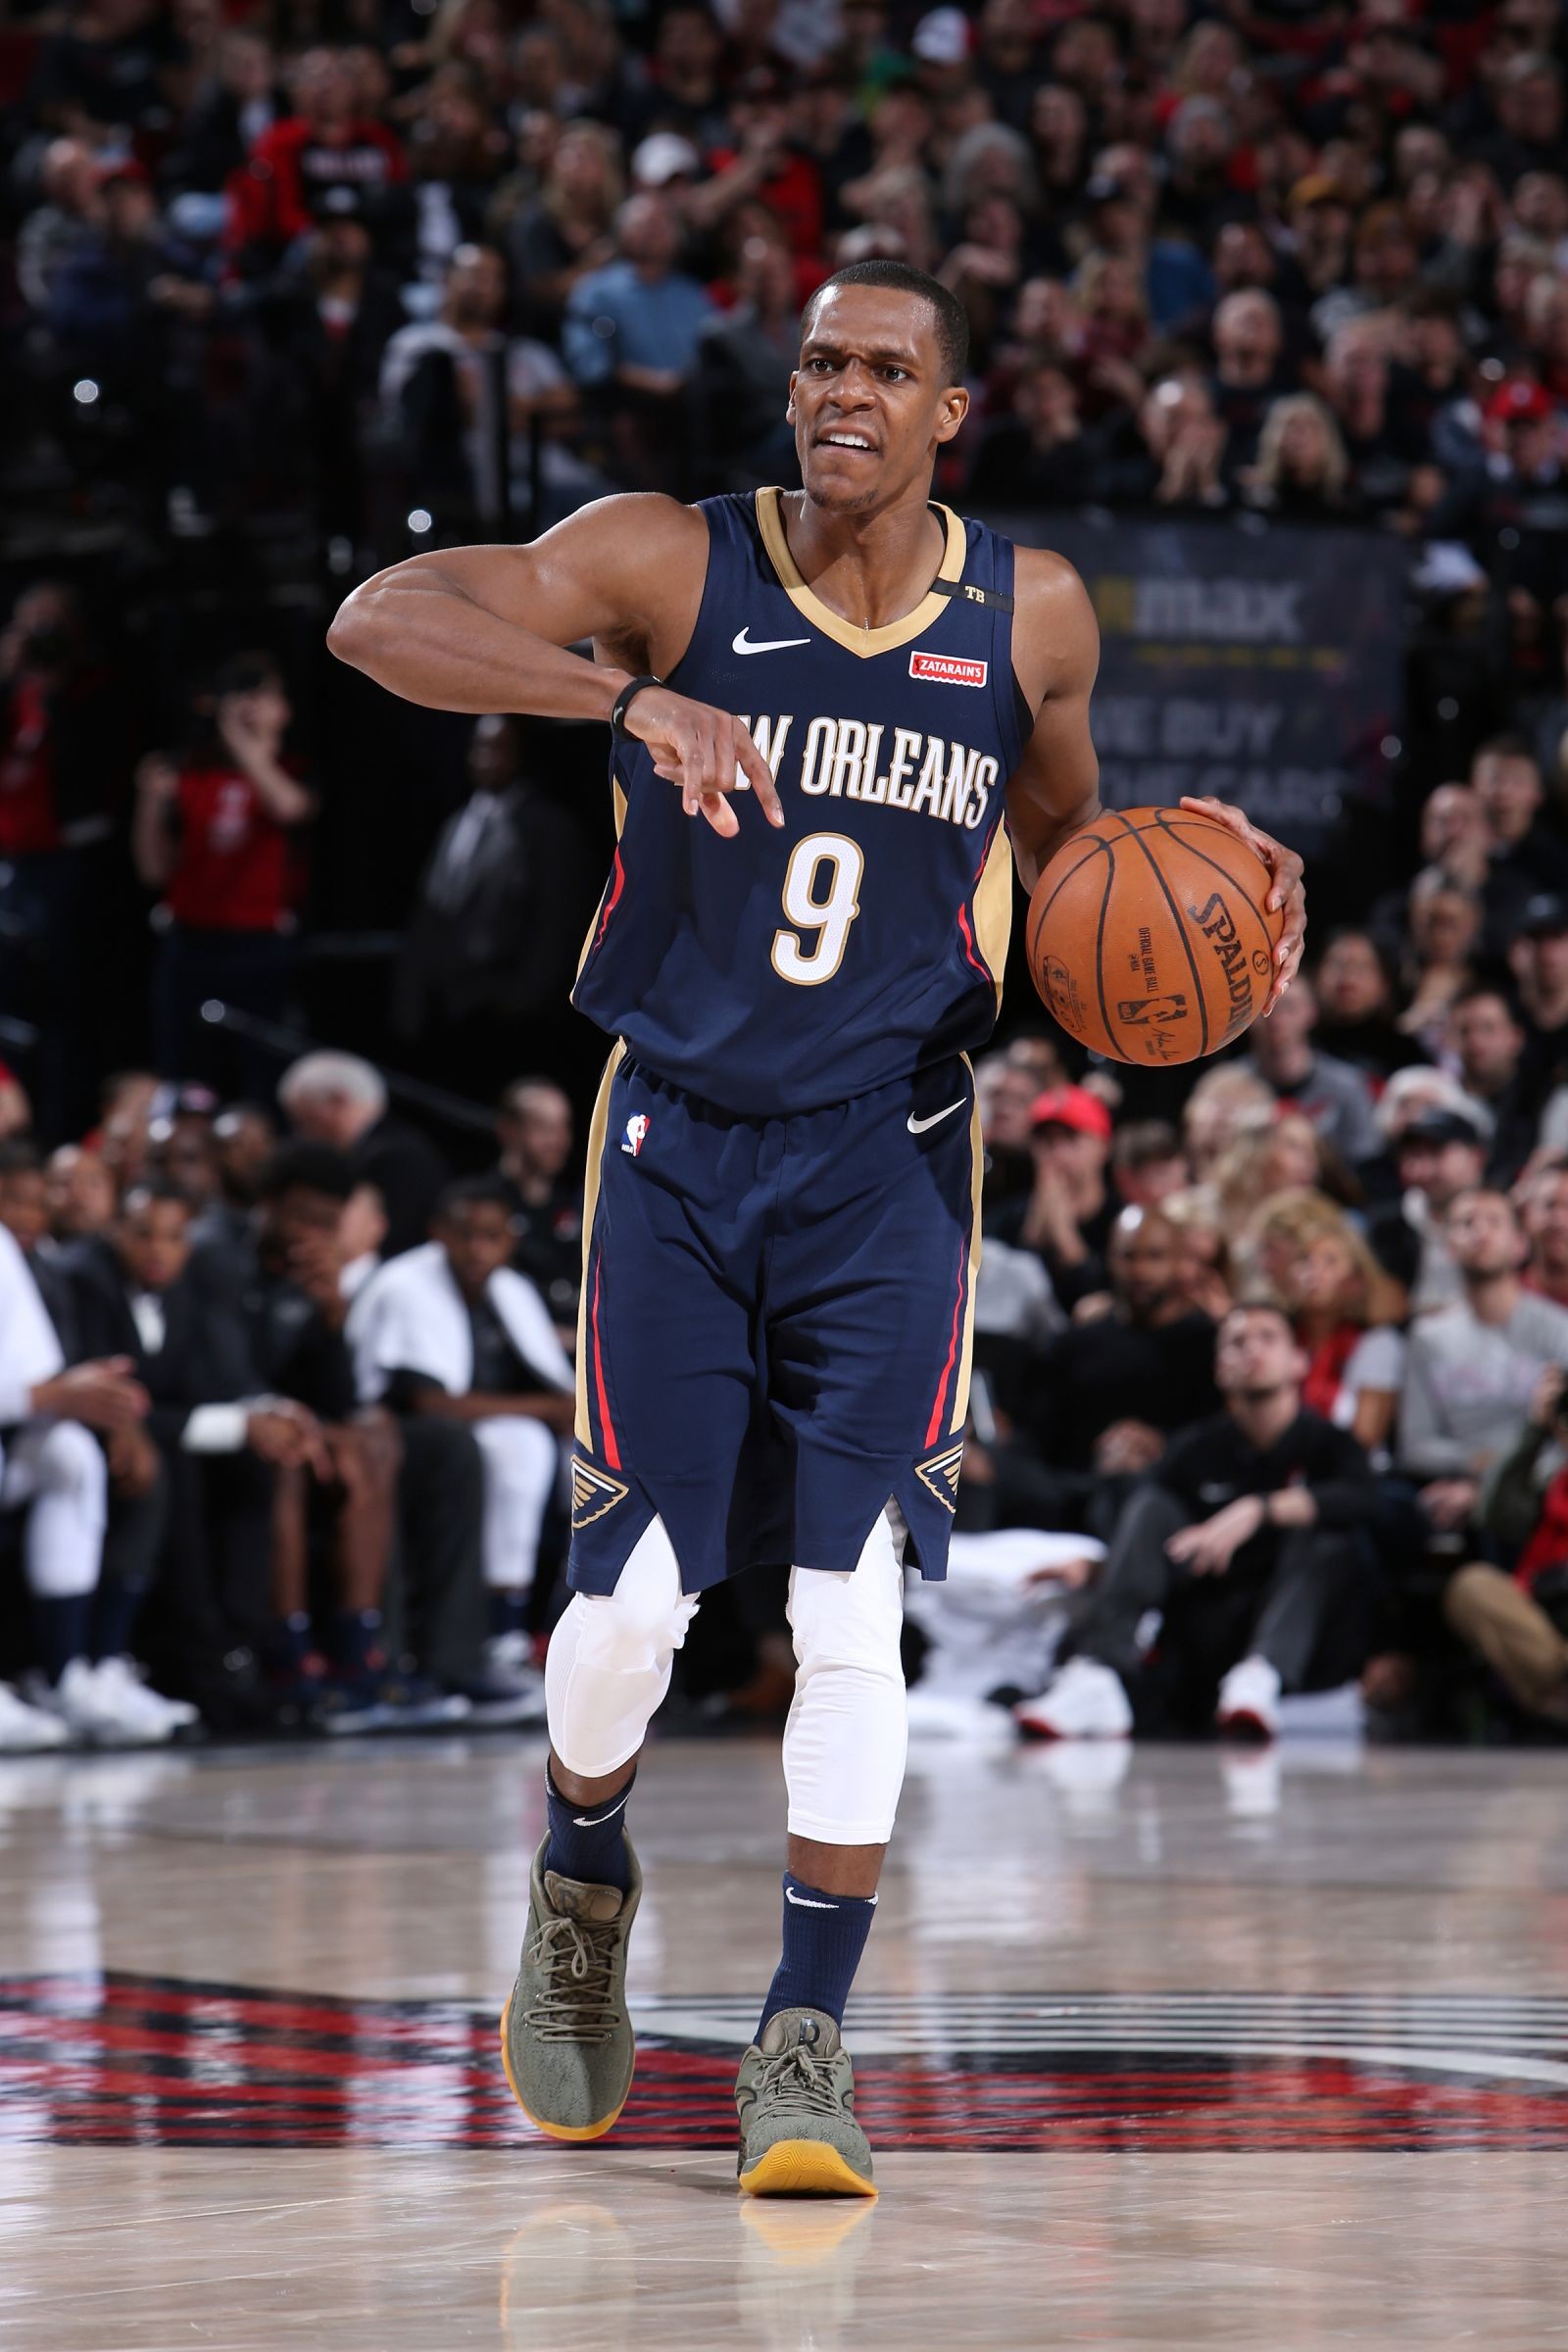 New Orleans Pelicans Playoff Rondo and the NBA Playoffs